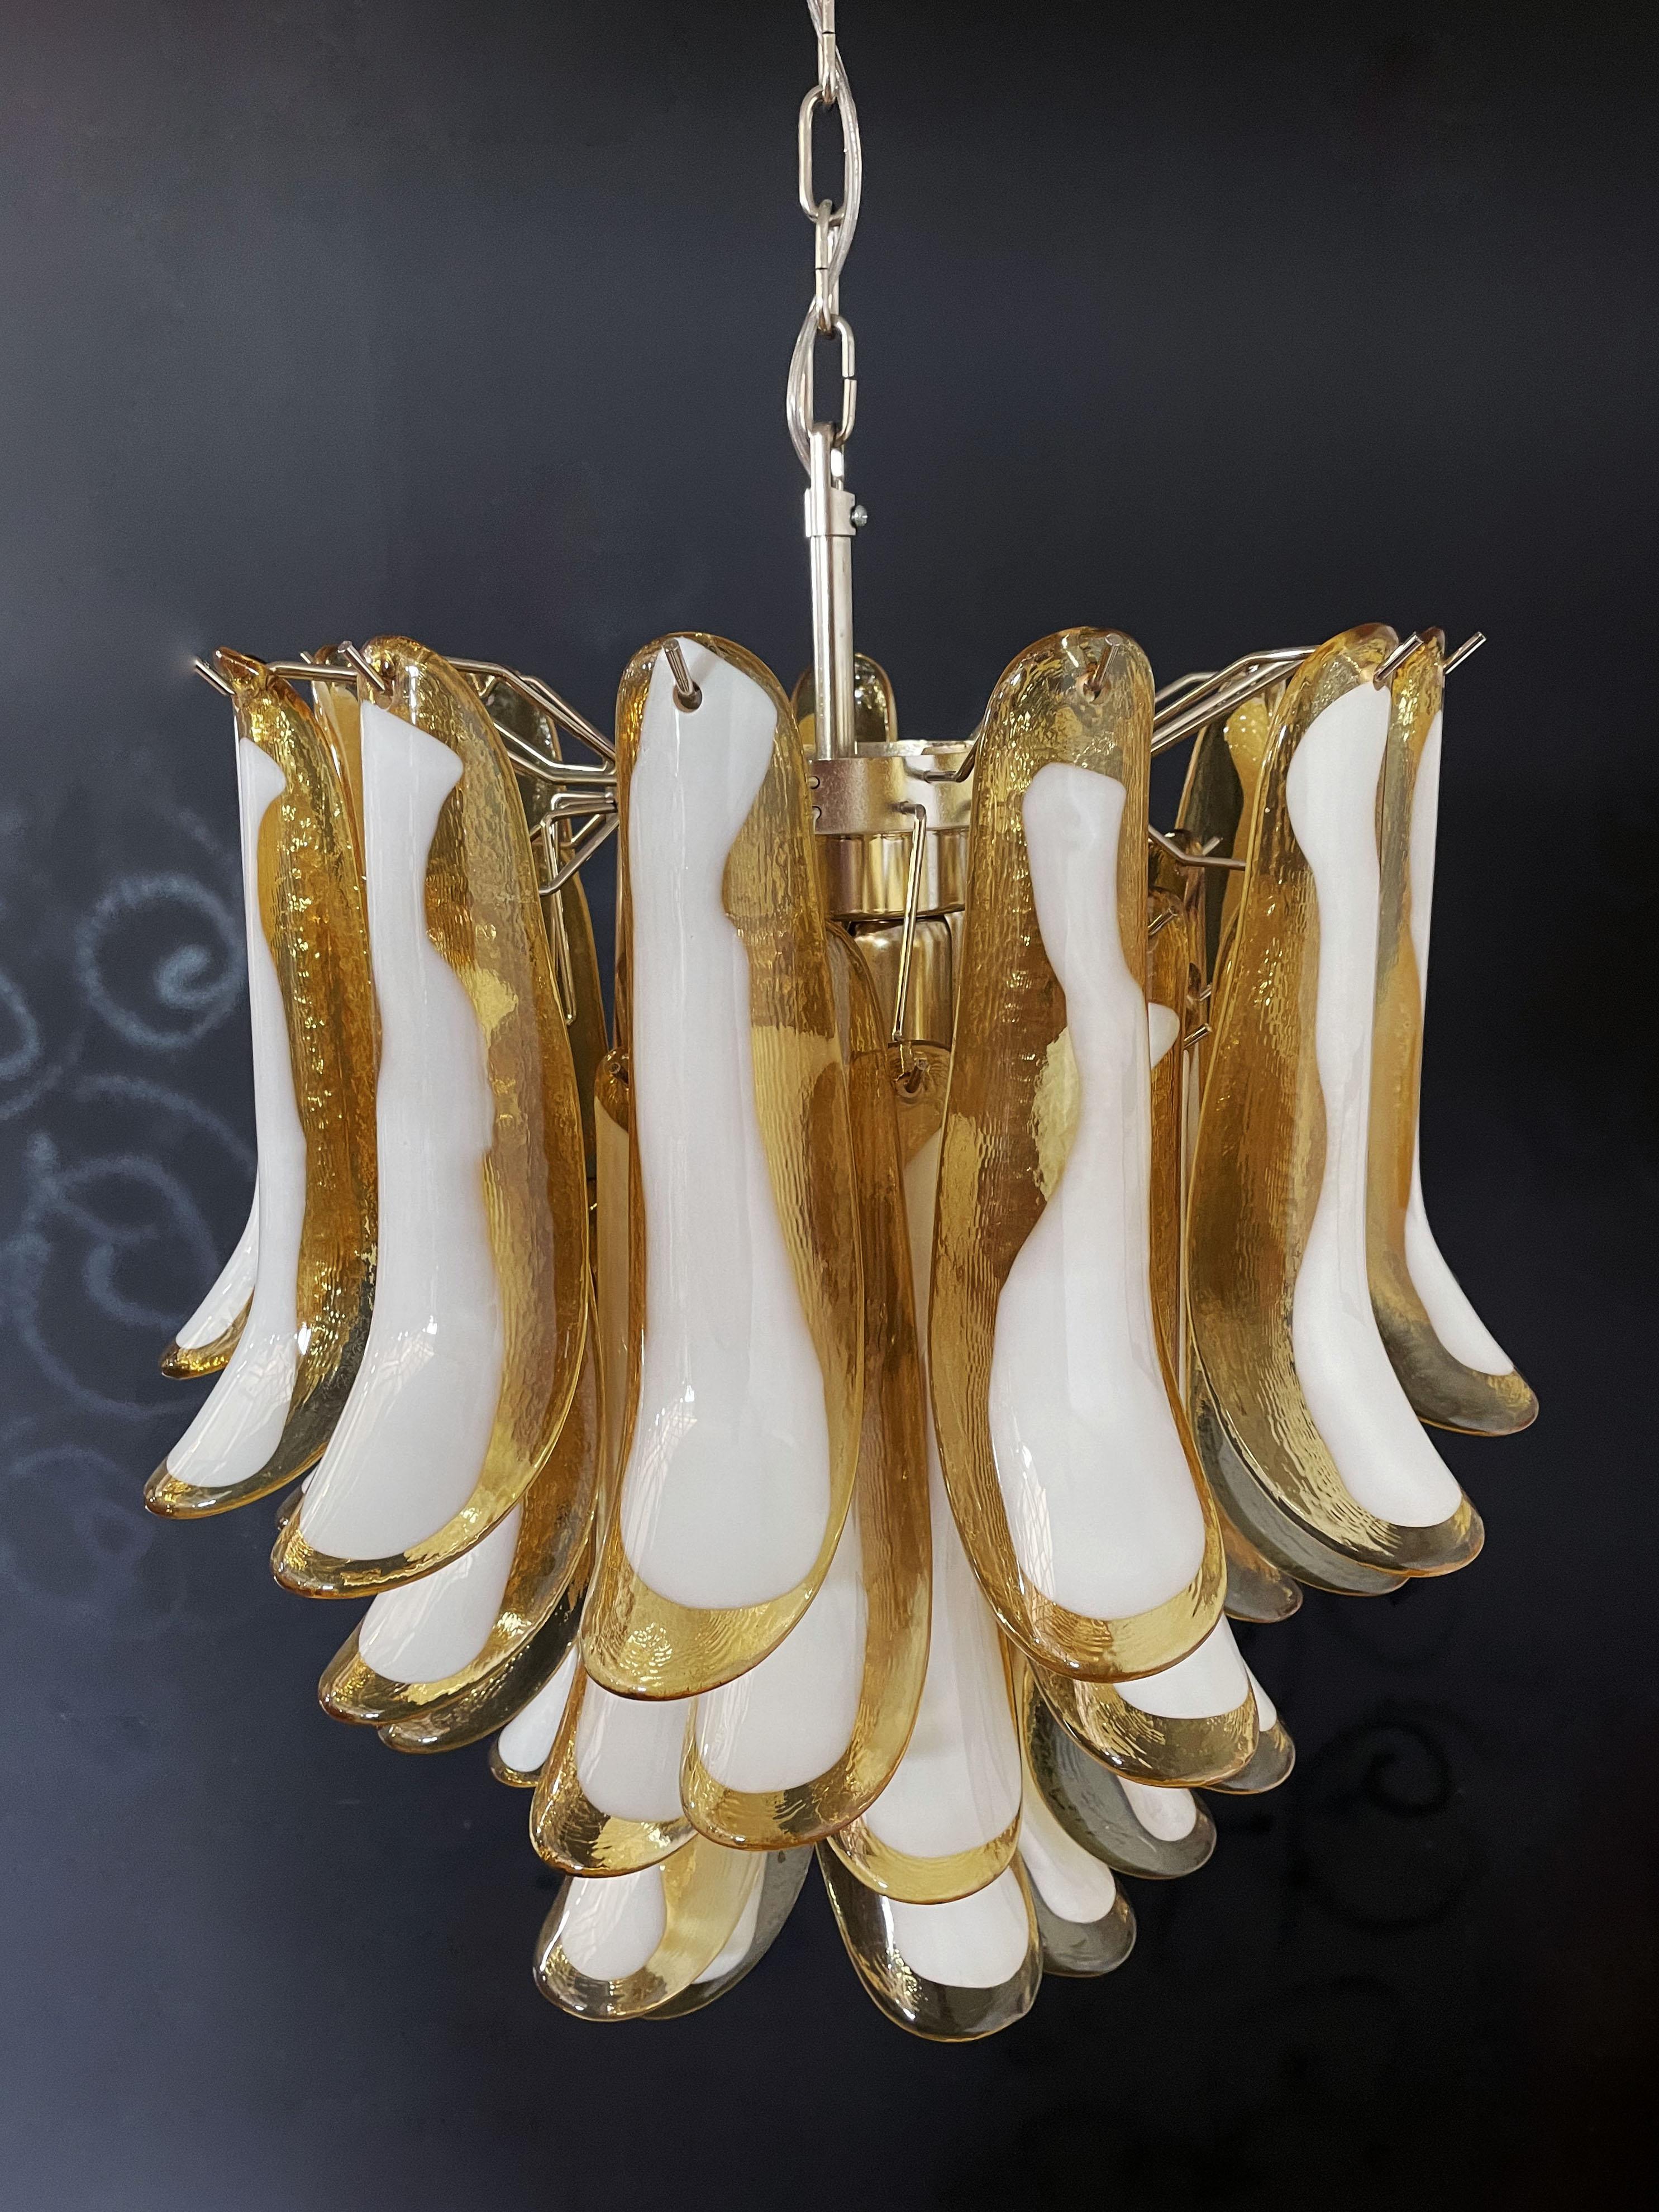 1970’s Murano Italian glass chandelier. Fantastic chandelier with caramel and white “lattimo” glasses, nickel-plated metal frame. It has 41 big monumental petals glass. The glasses are very high quality, the photos do not do the beauty, luster of